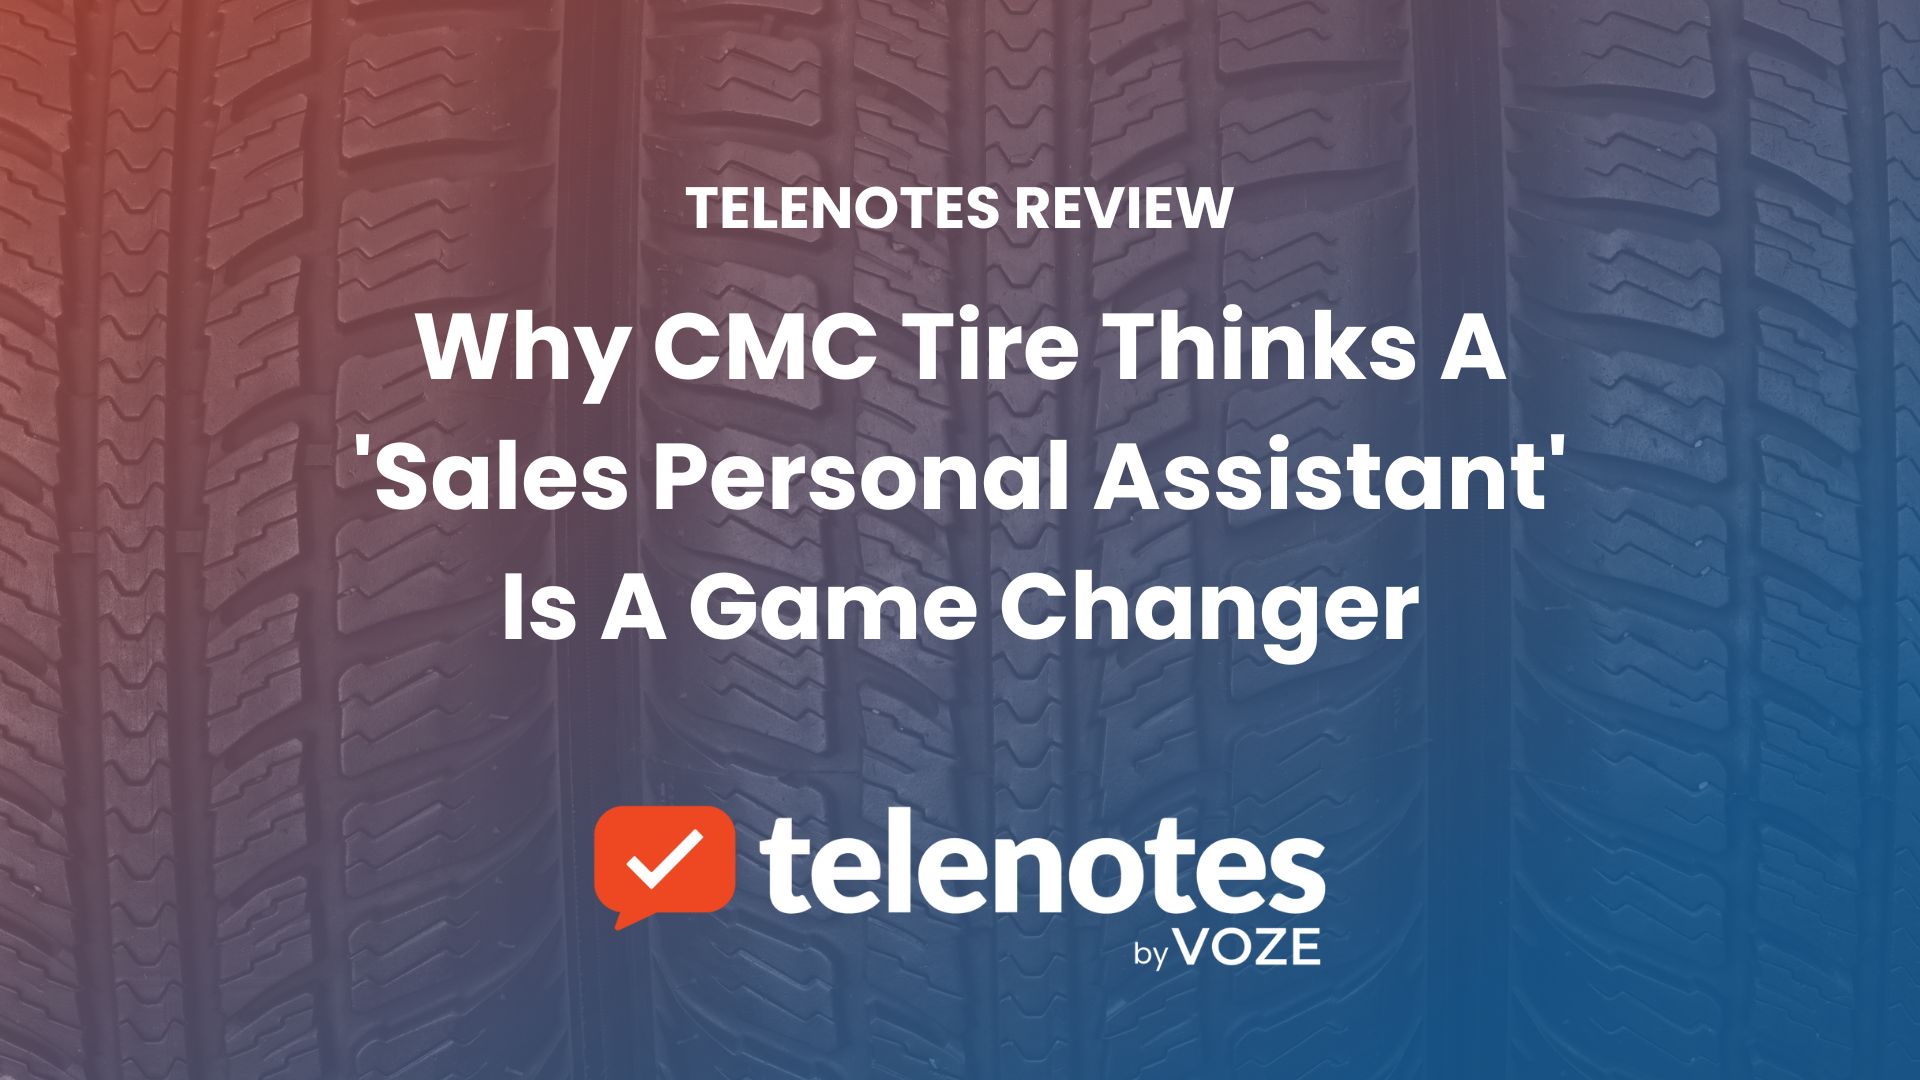 Telenotes Review: Why CMC Tire Thinks A ‘Sales Personal Assistant’ Is A Game Changer